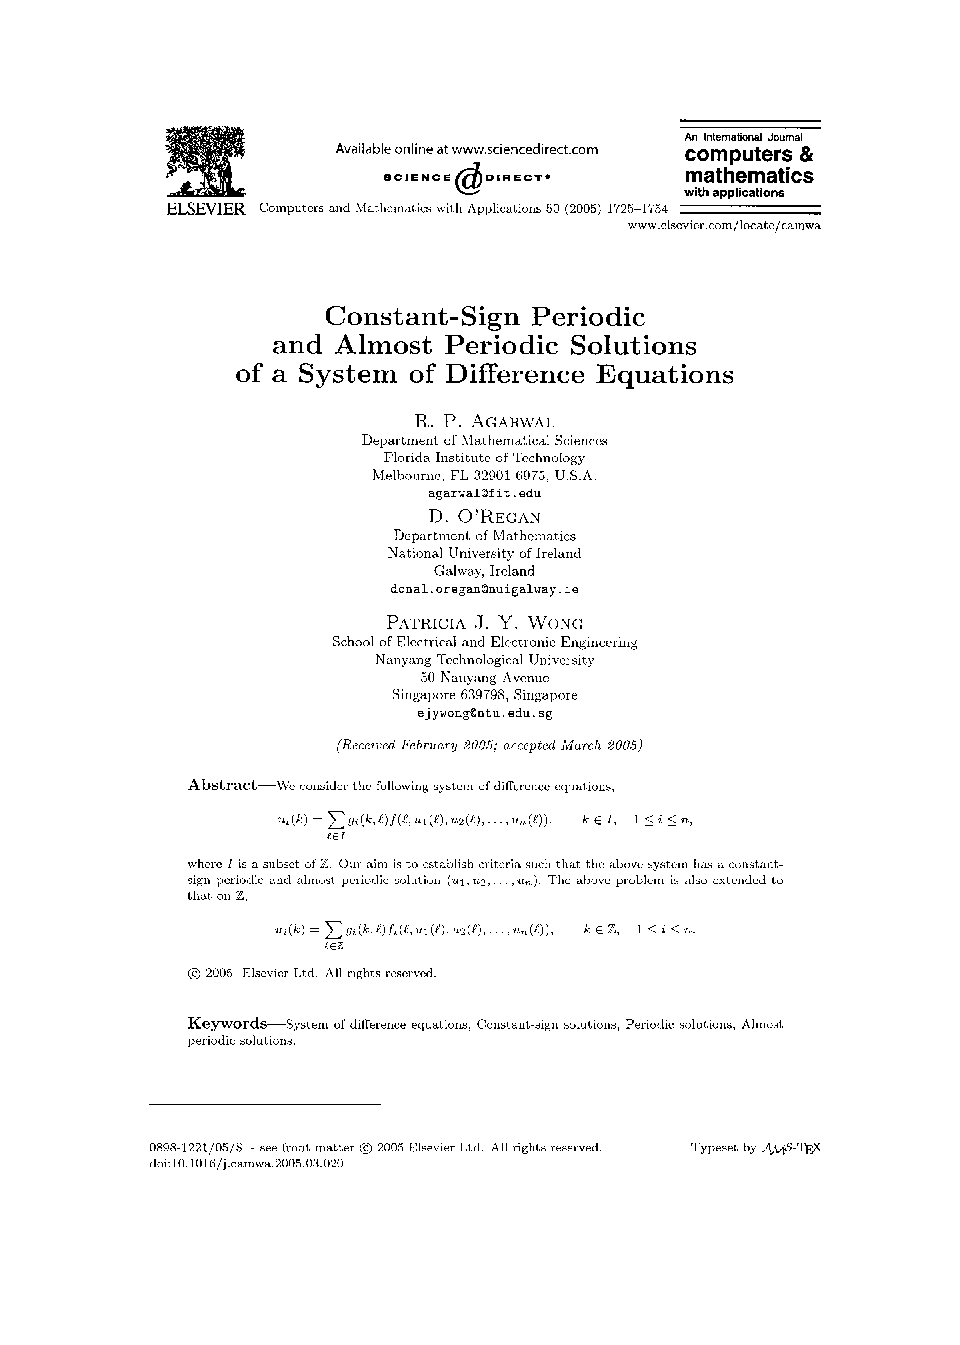 Constant-sign periodic and almost periodic solutions of a system of difference equations